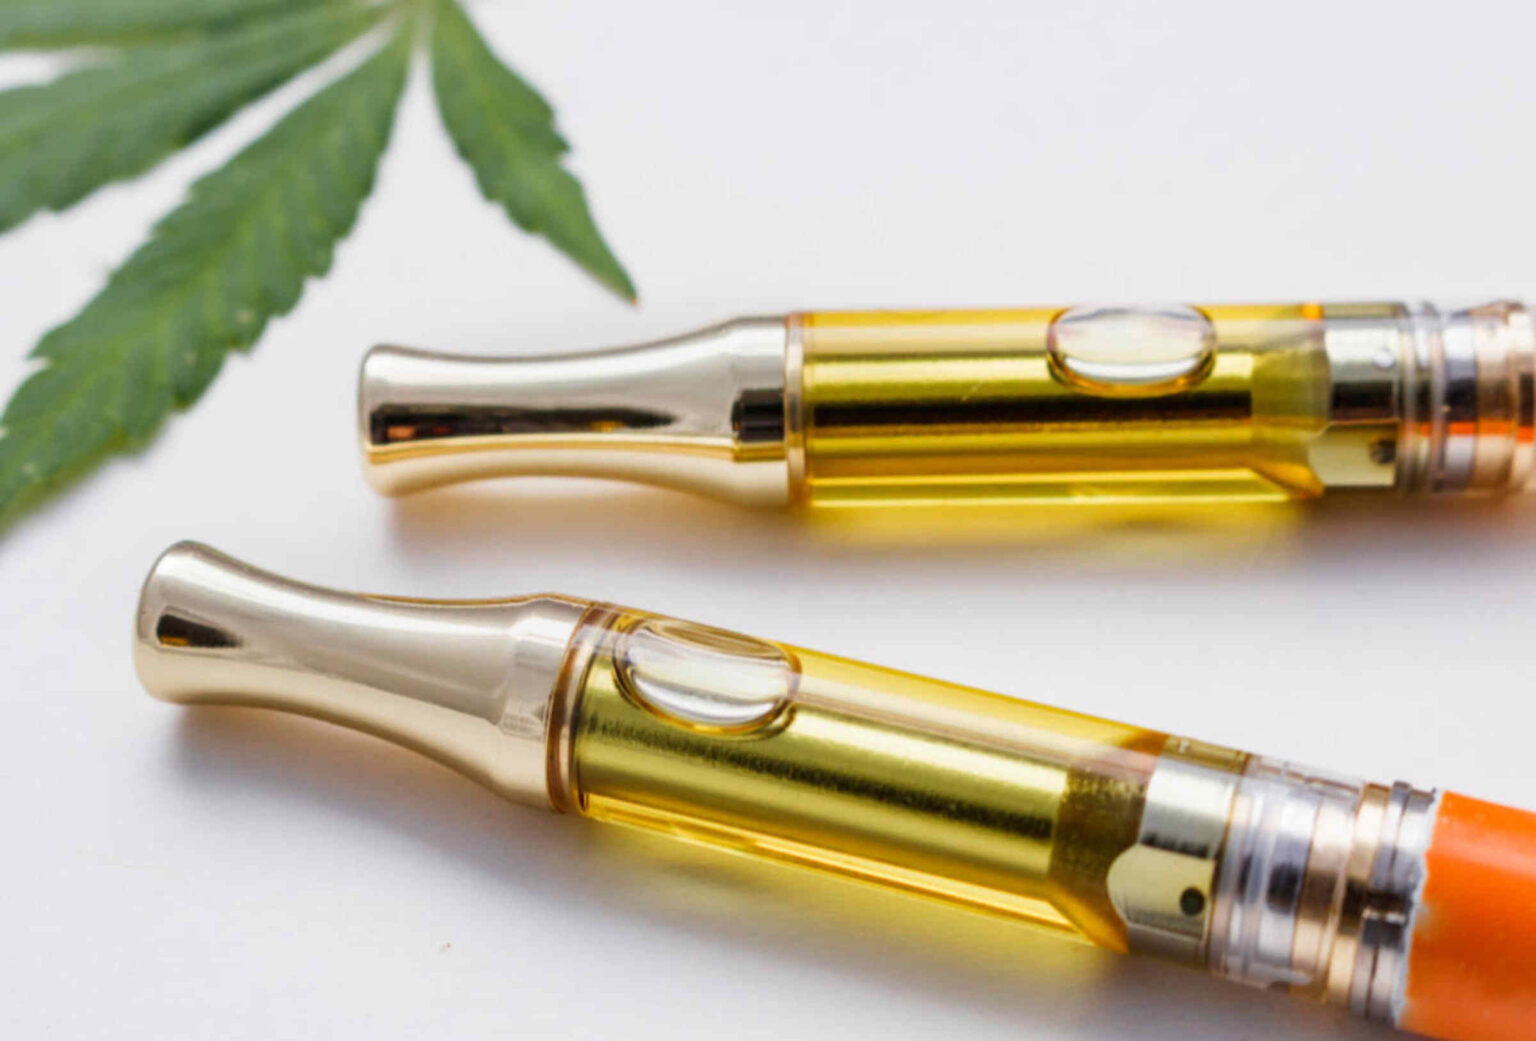 Vaping can be relaxing, but it can also be unexpectedly helpful. Inhale your way into the surprising benefits of using Delta 9 cartridges!